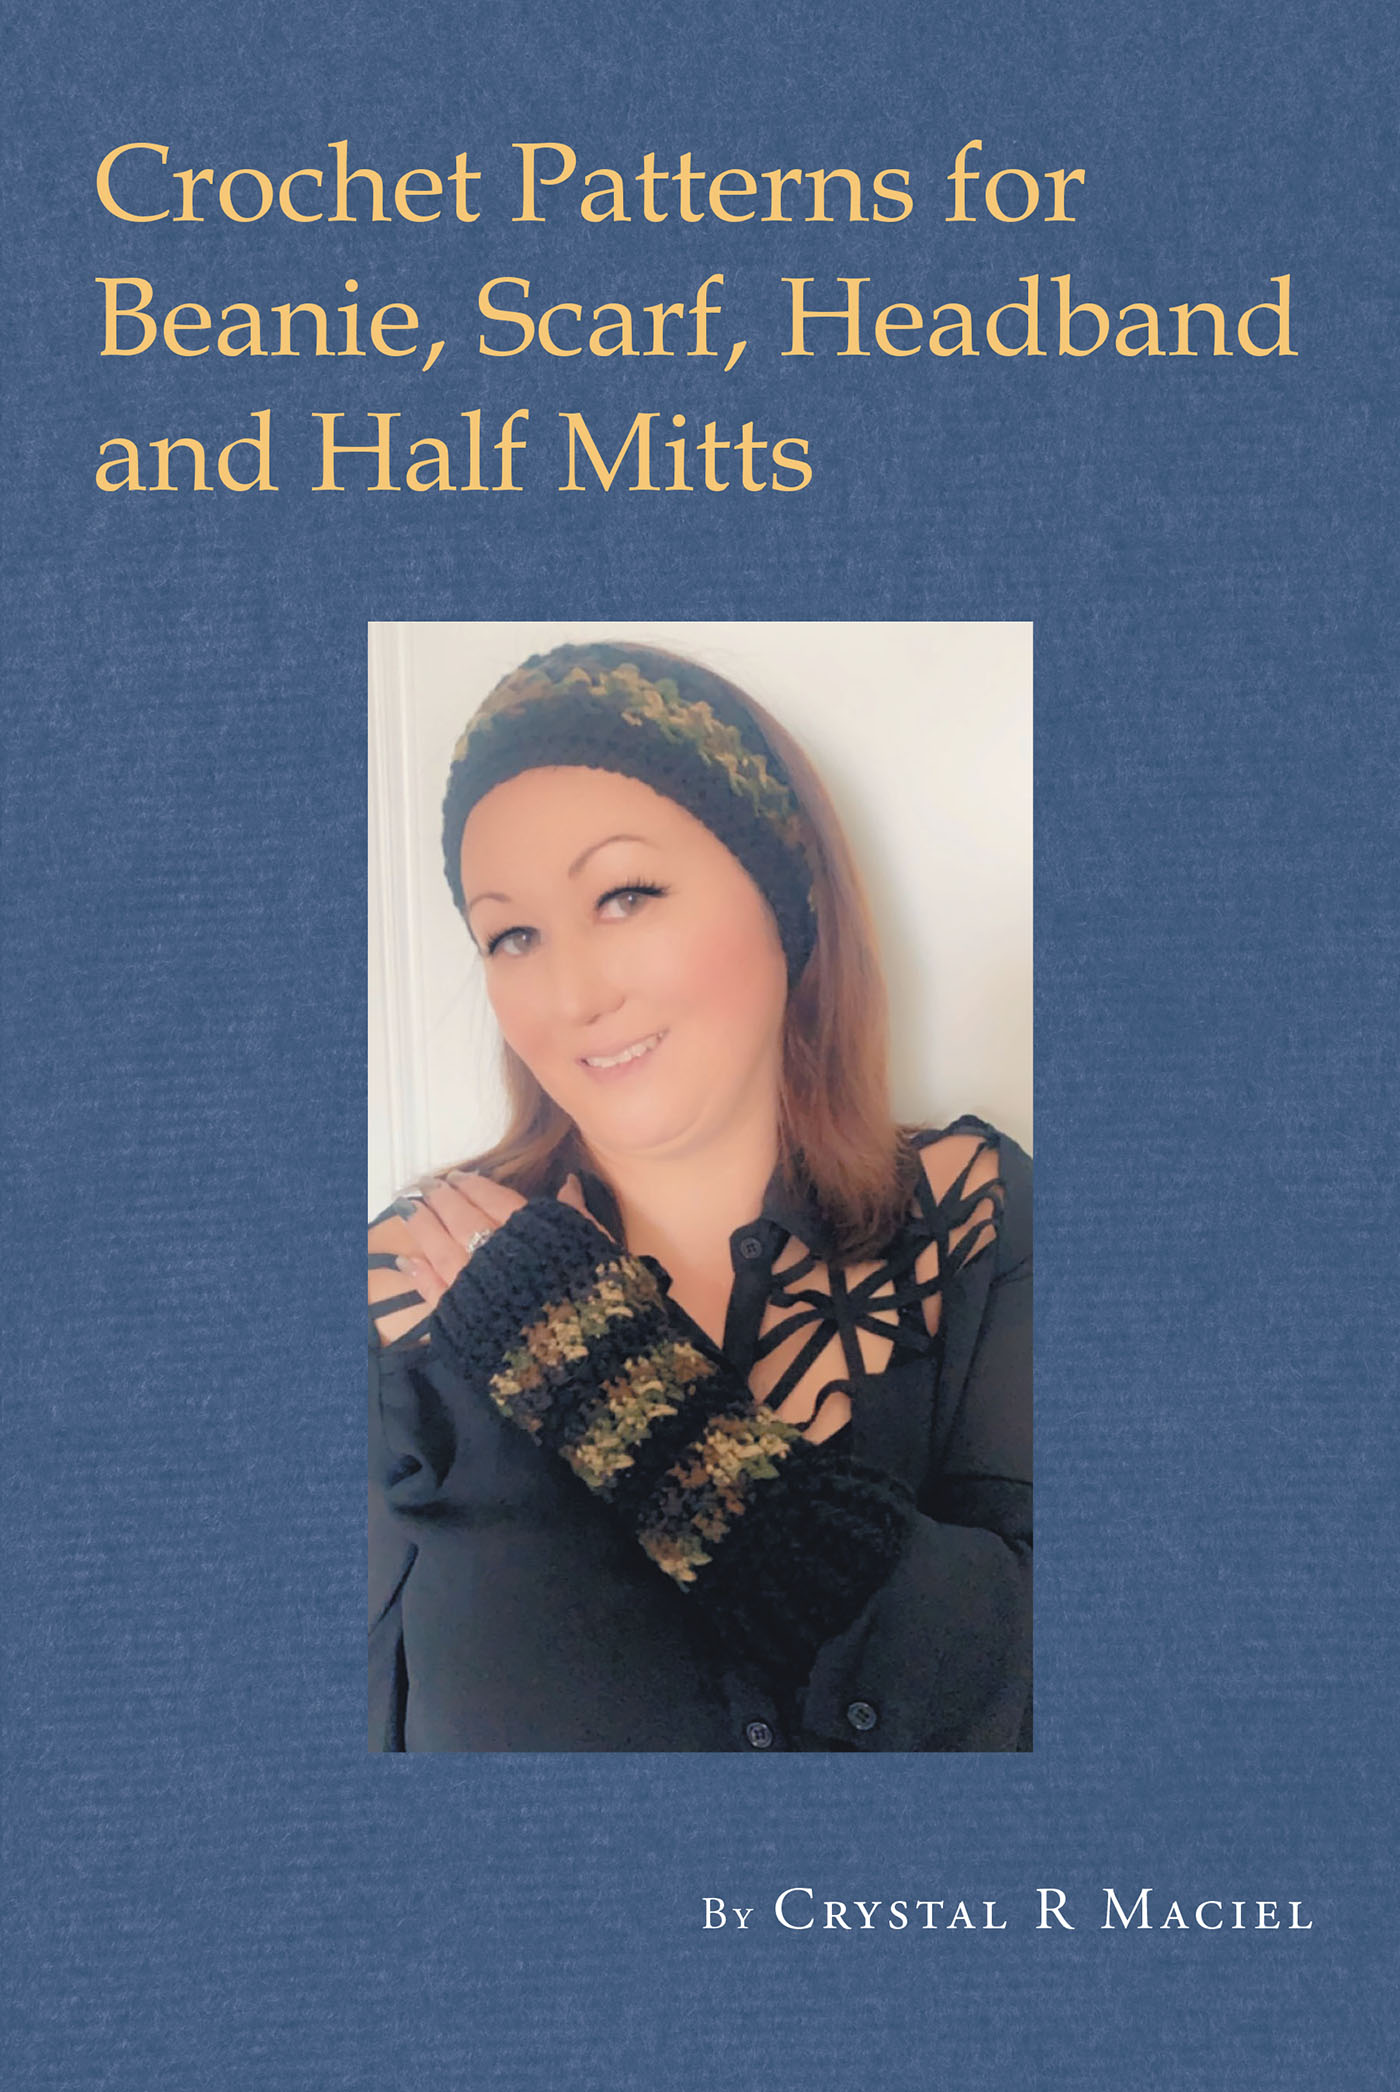 Crochet Patterns for Beanie, Scarf, Half Mitt and Headband  Cover Image